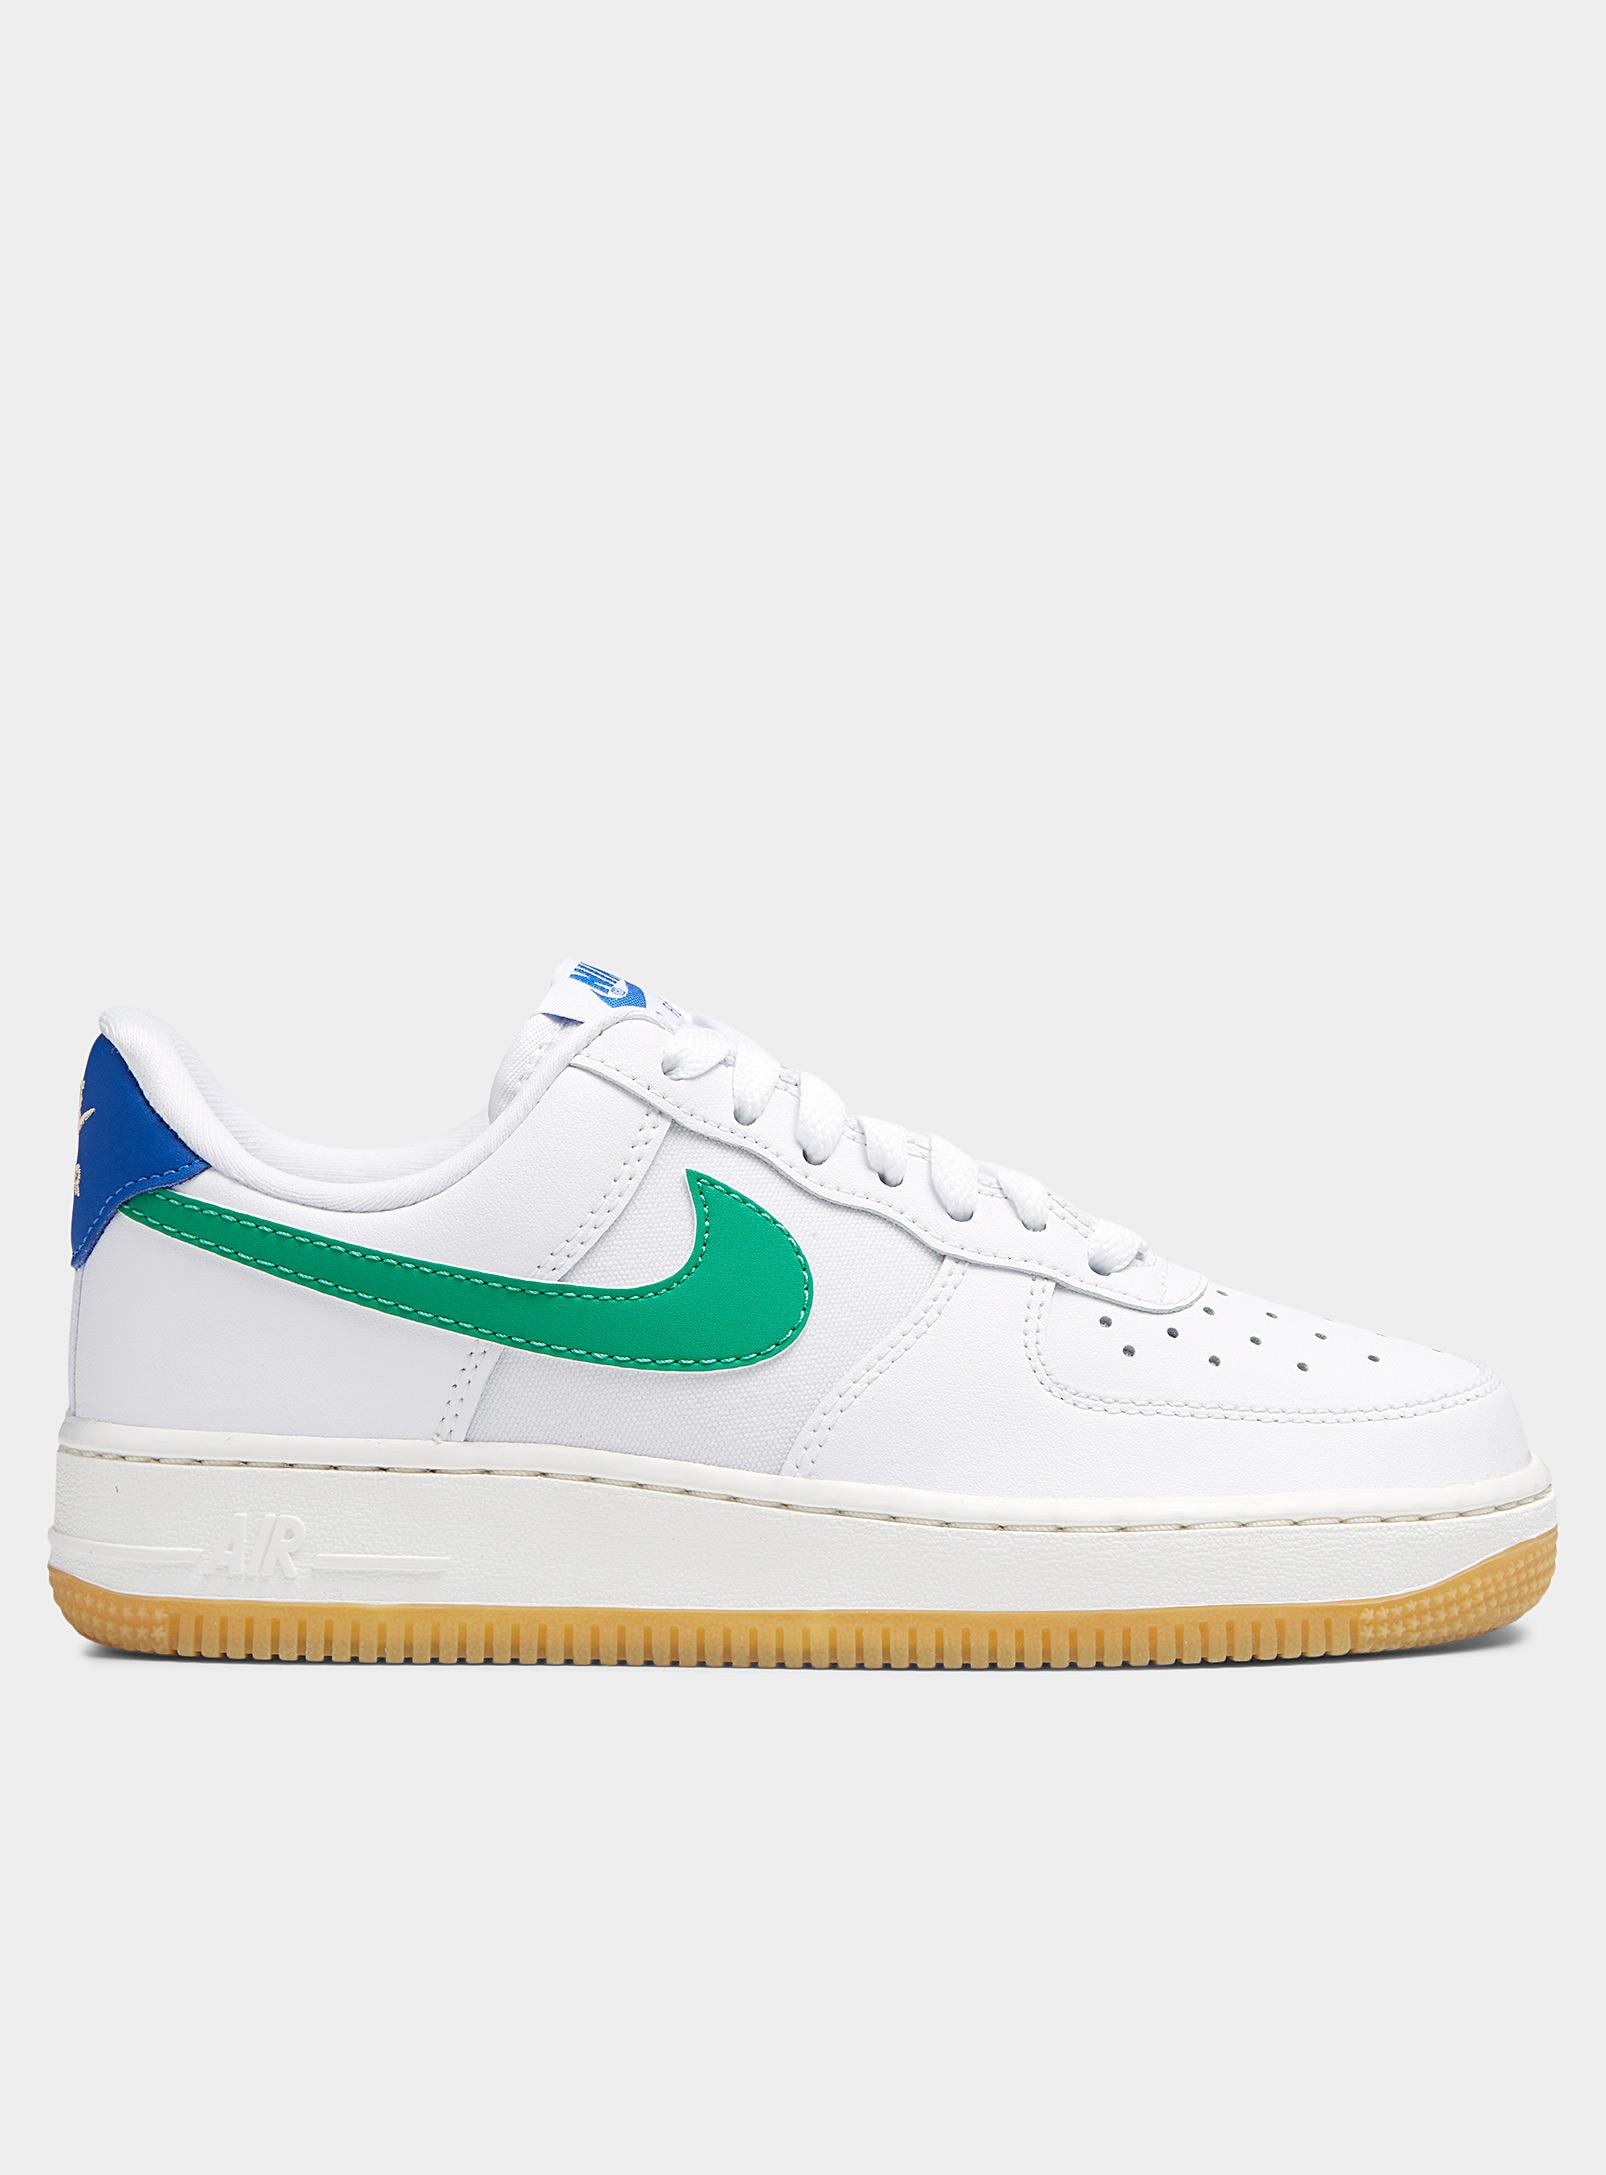 Nike Colourful Accents Air Force 1 '07 Sneakers Women in Blue | Lyst